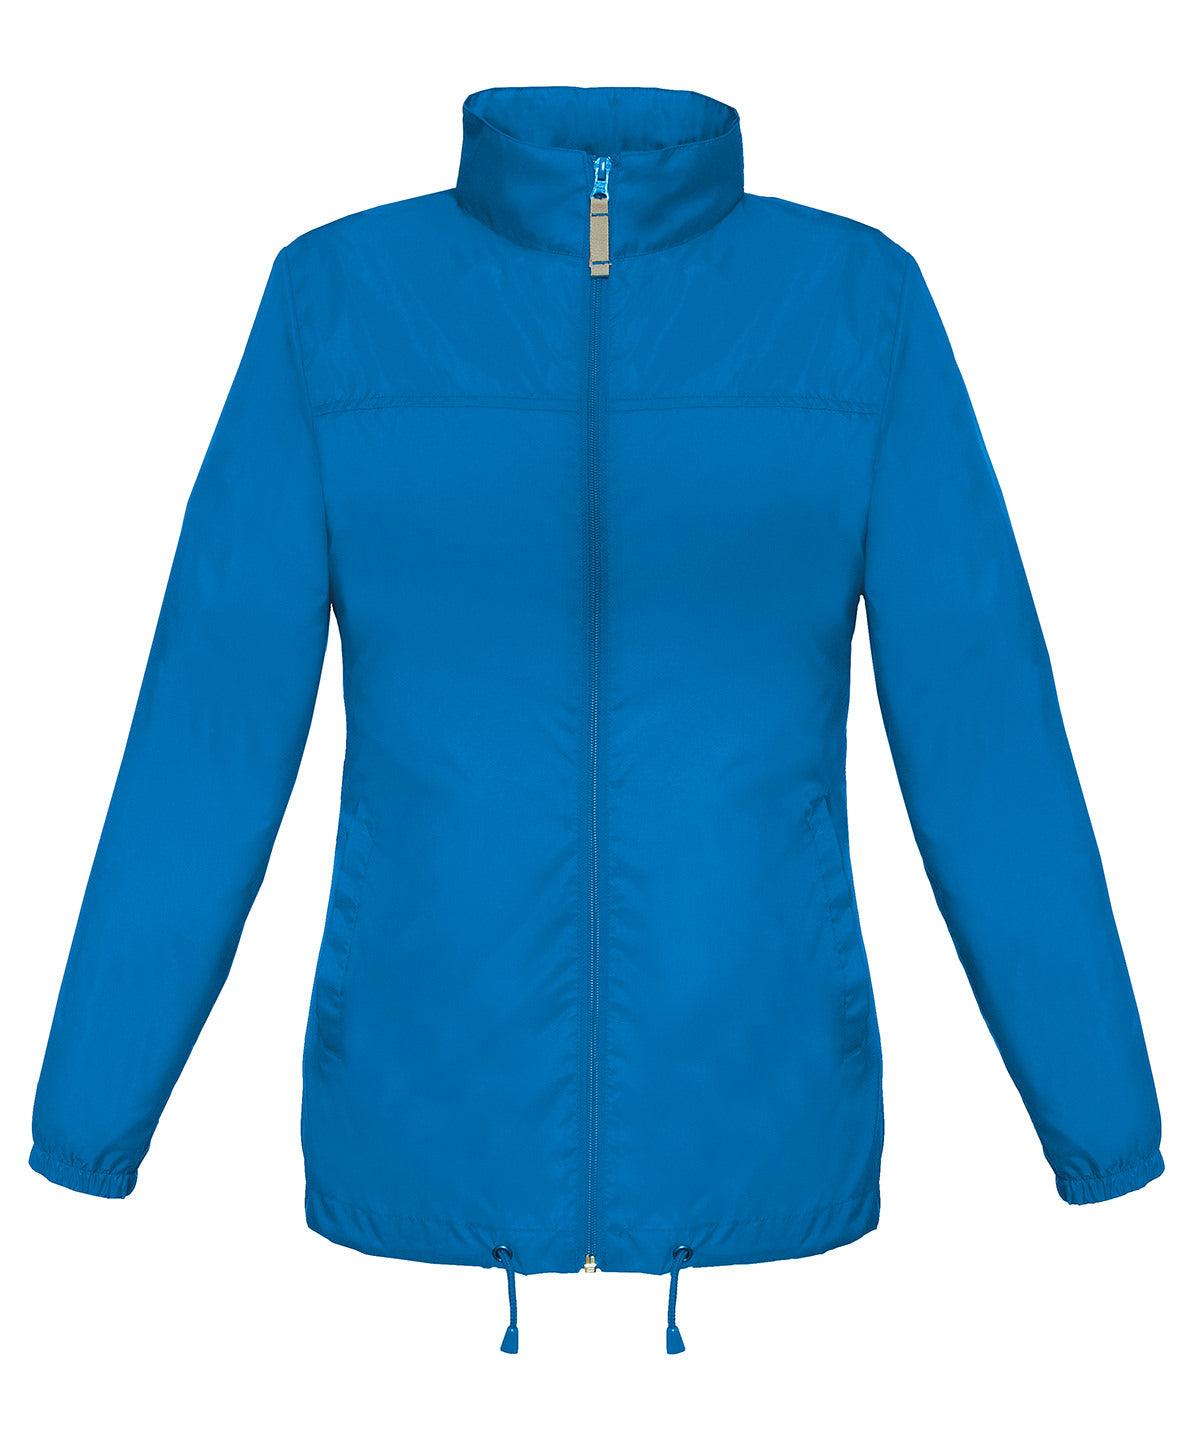 Royal Blue - B&C Sirocco /women Jackets B&C Collection Jackets & Coats, Women's Fashion Schoolwear Centres